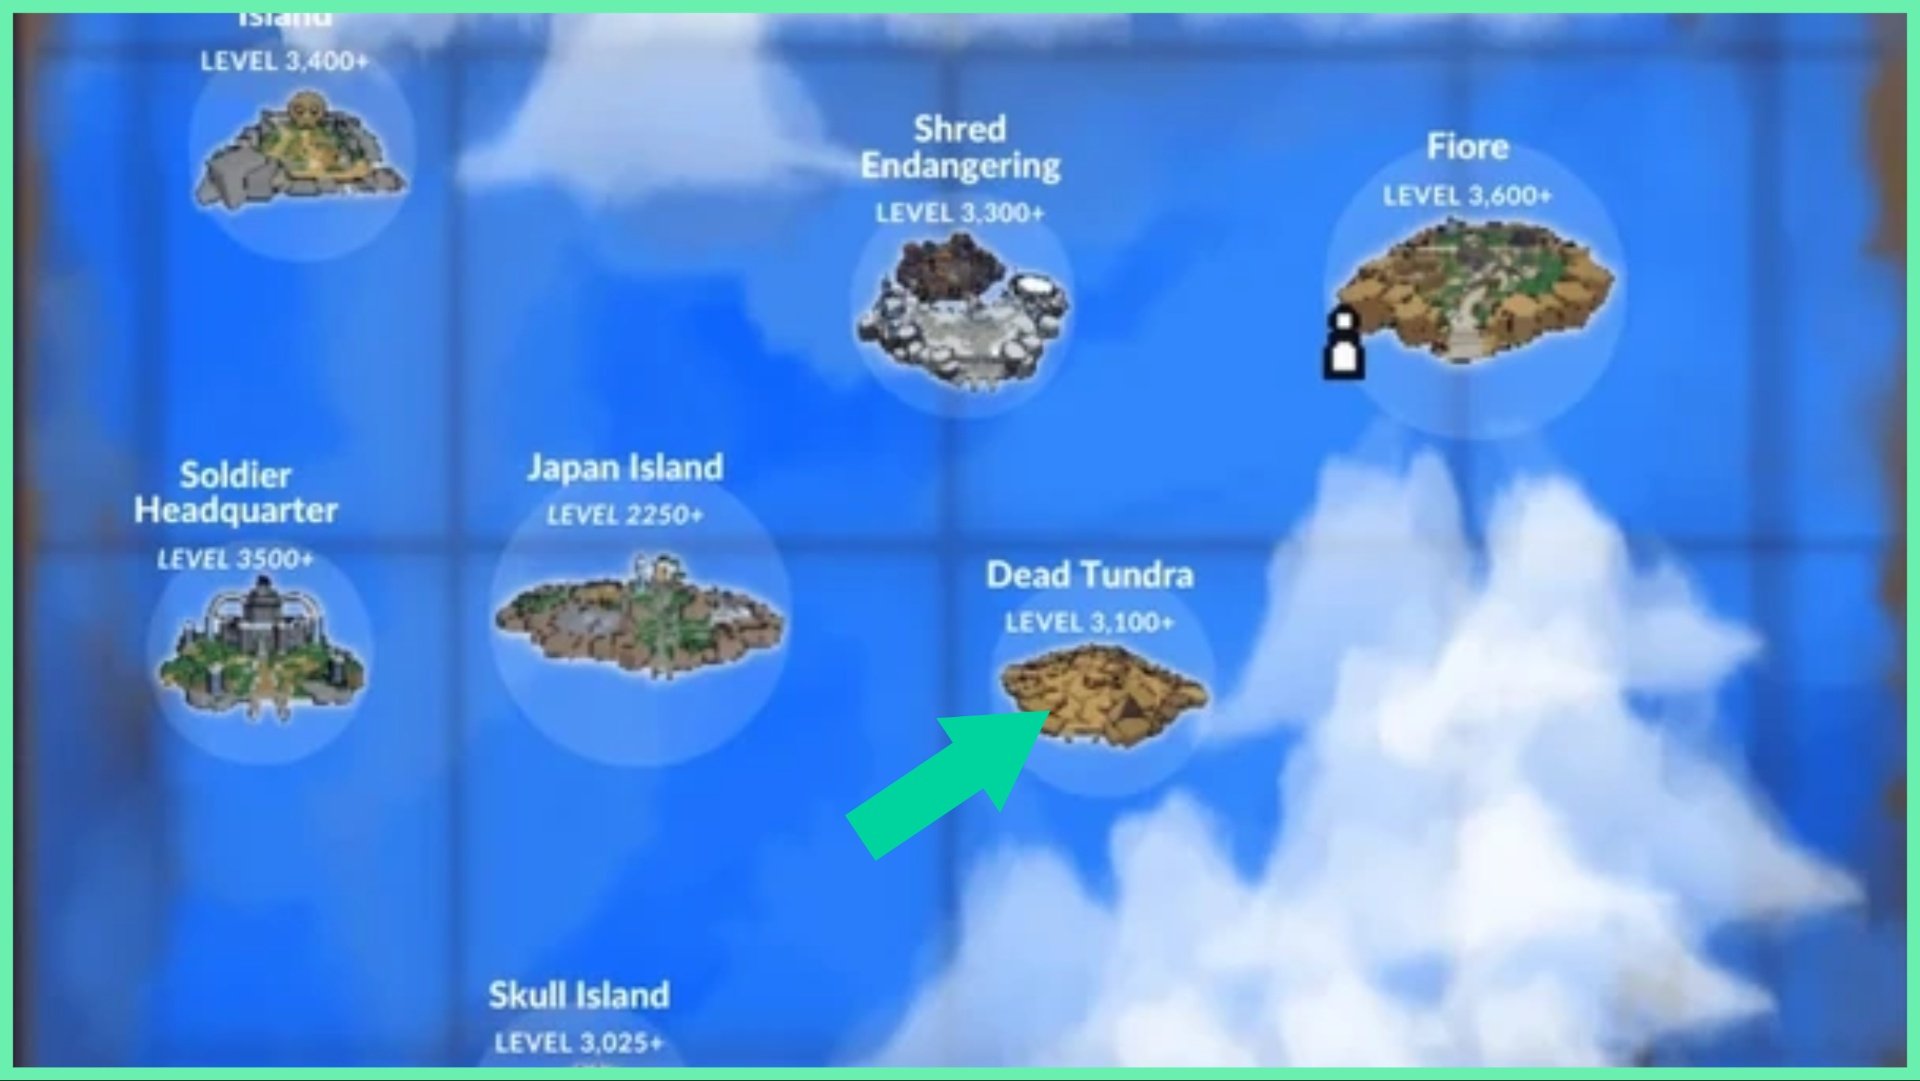 The image shows the map location for where Lost Rubies can be found in King Legacy. The map is all blue with white clouds circling around islands. The island being pointed to by a green arrow is called Dead tundra